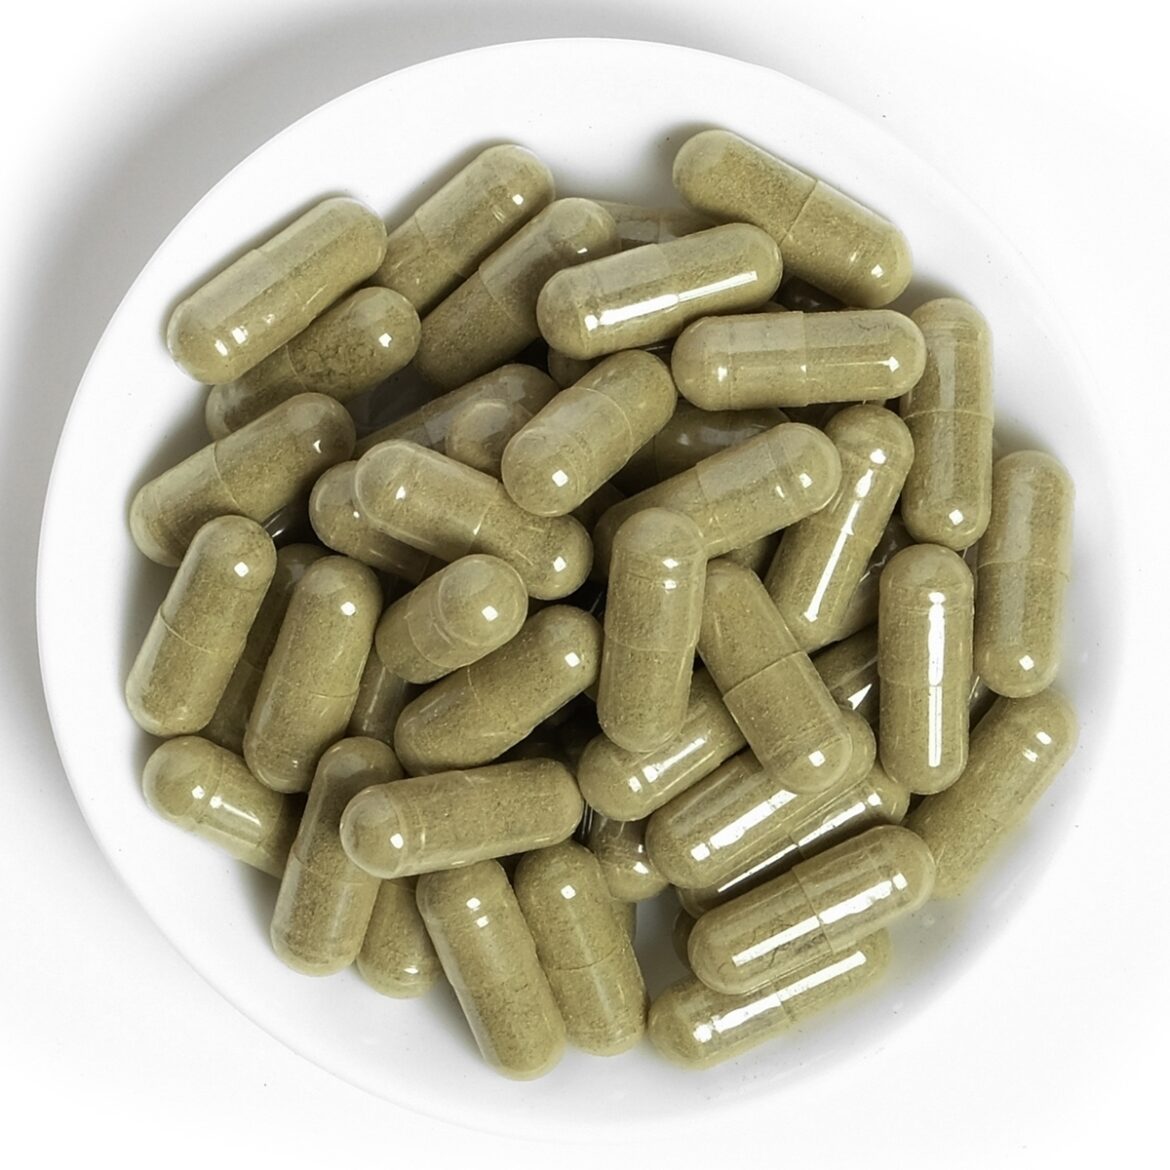 Best Kratom To Buy Online: The Best American Drug For Anxiety And Stress